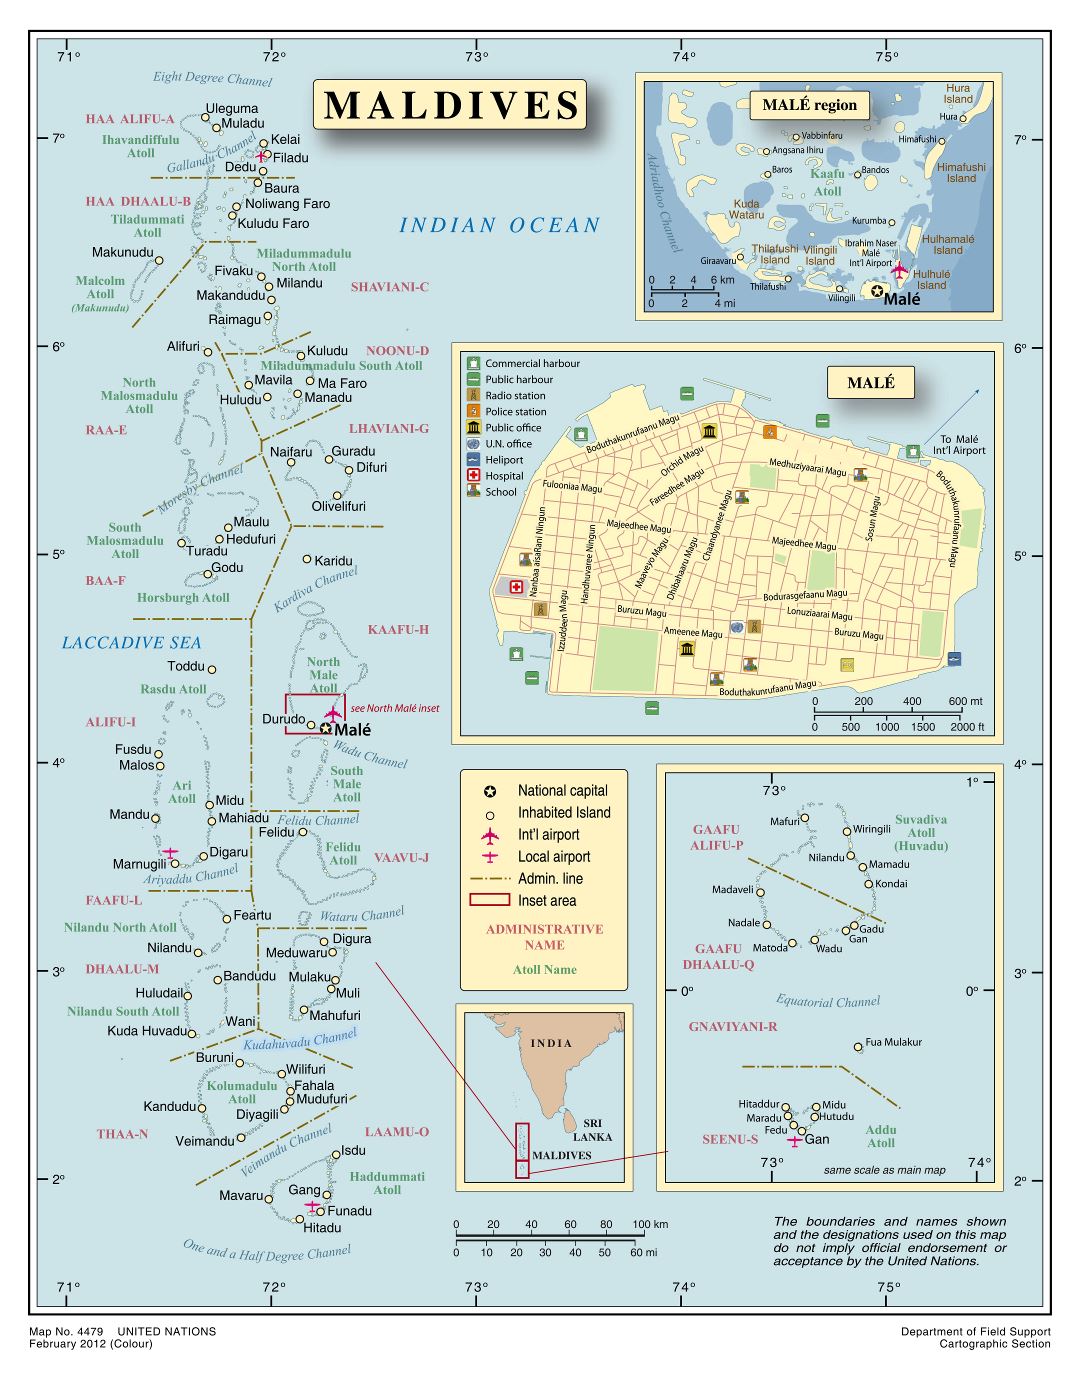 Large scale political and administrative map of Maldives with cities and airports